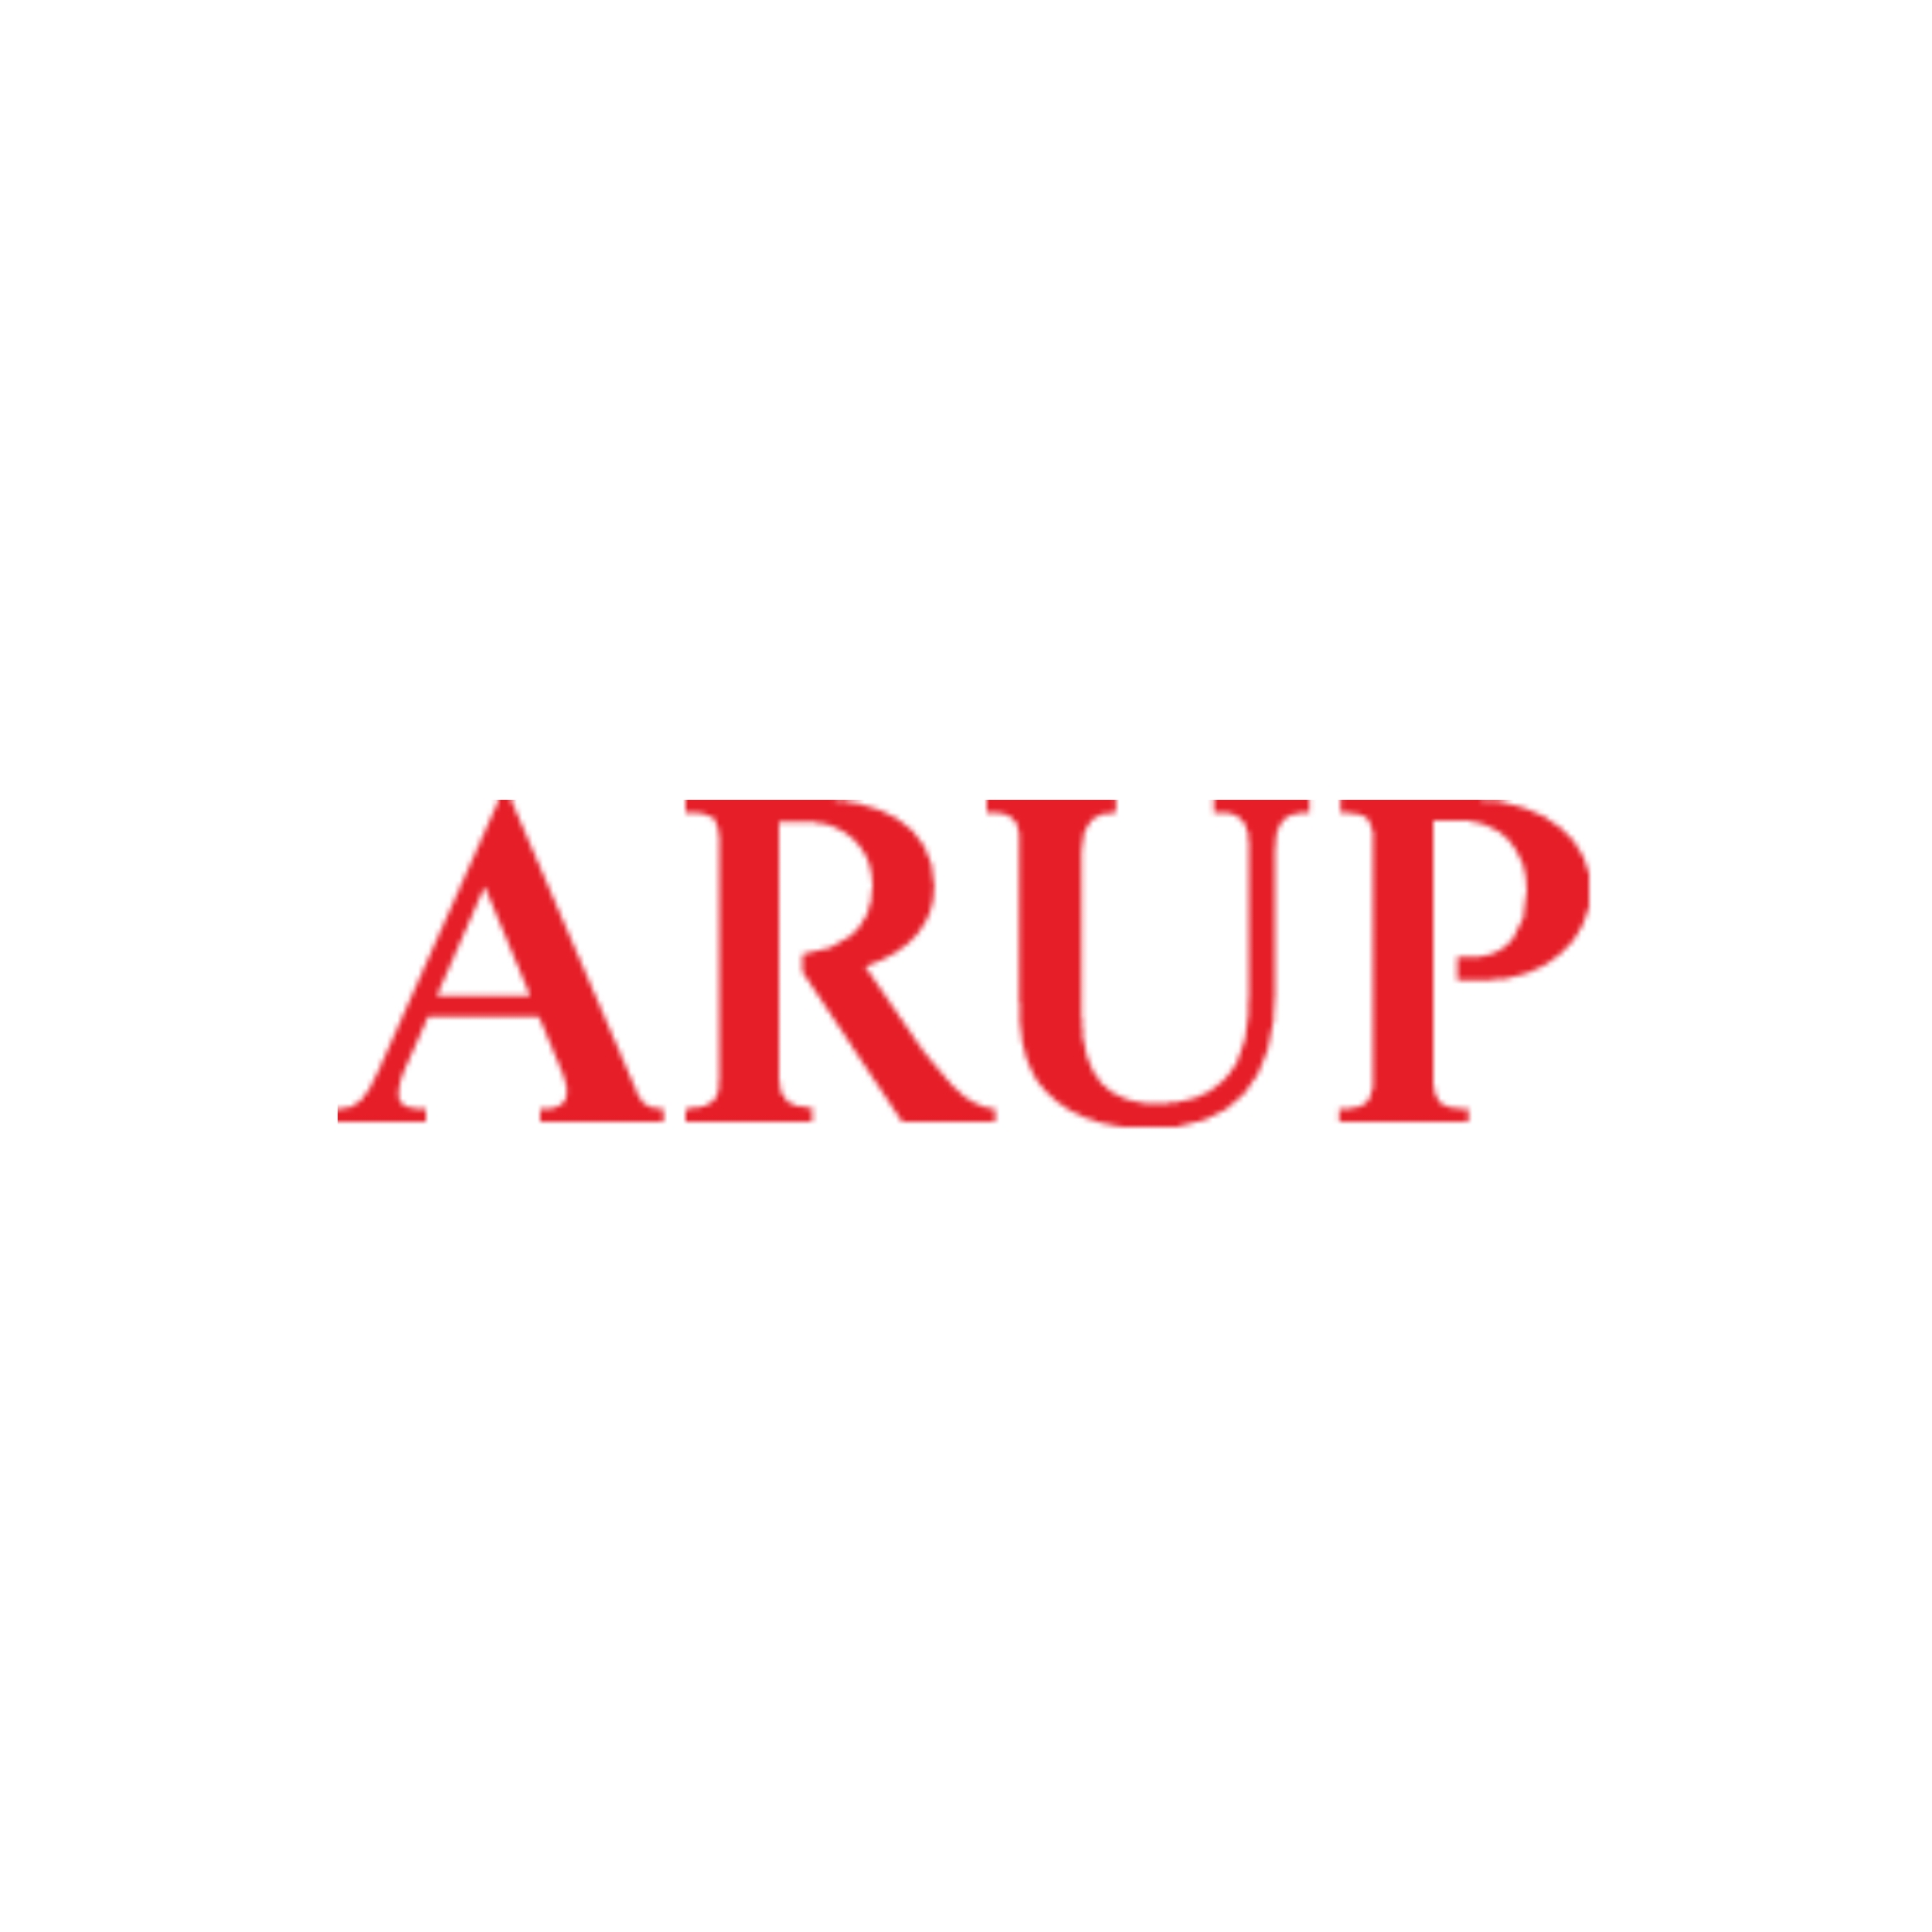 Welcome back our renewing member - Arup